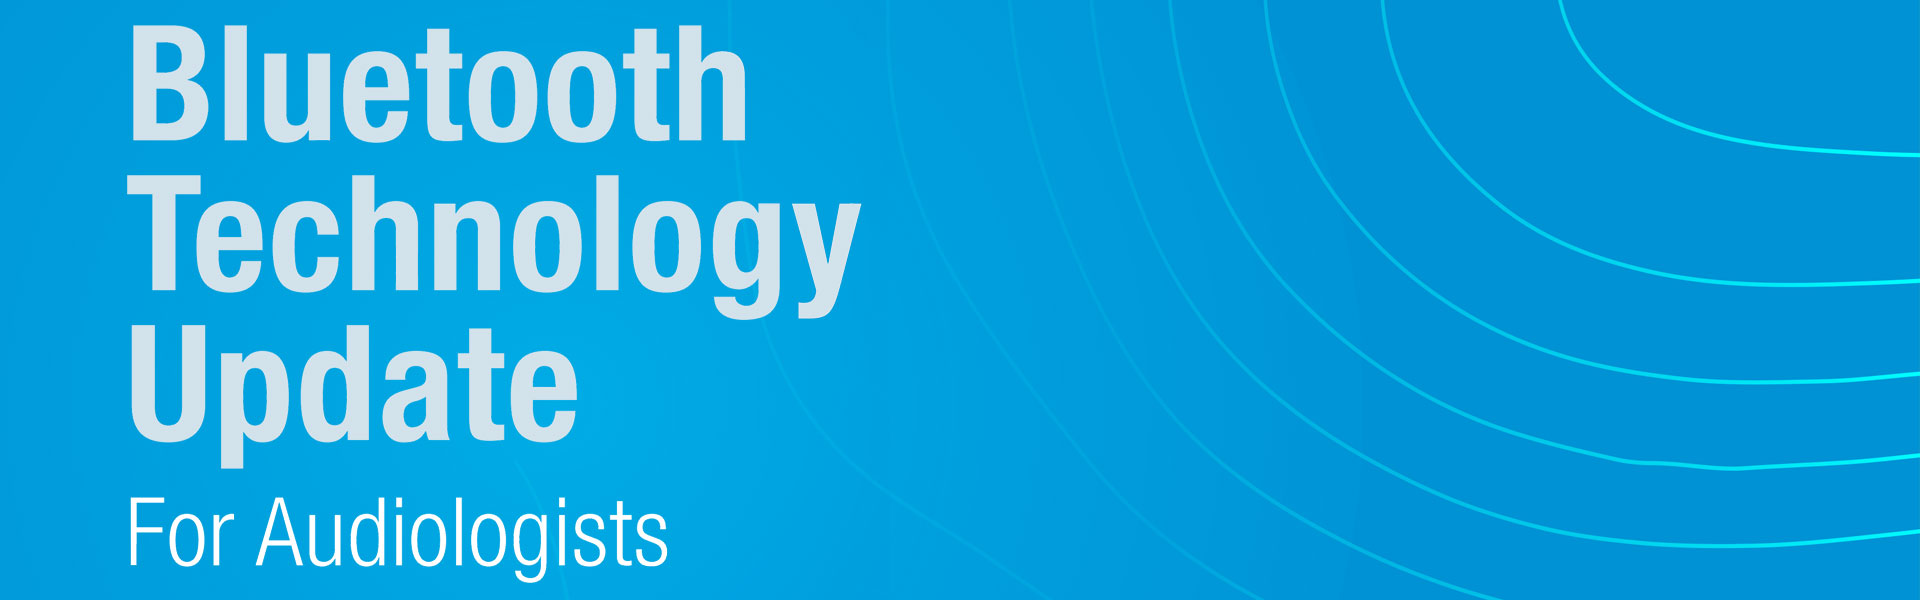 Bluetooth Technology Update for Audiologists